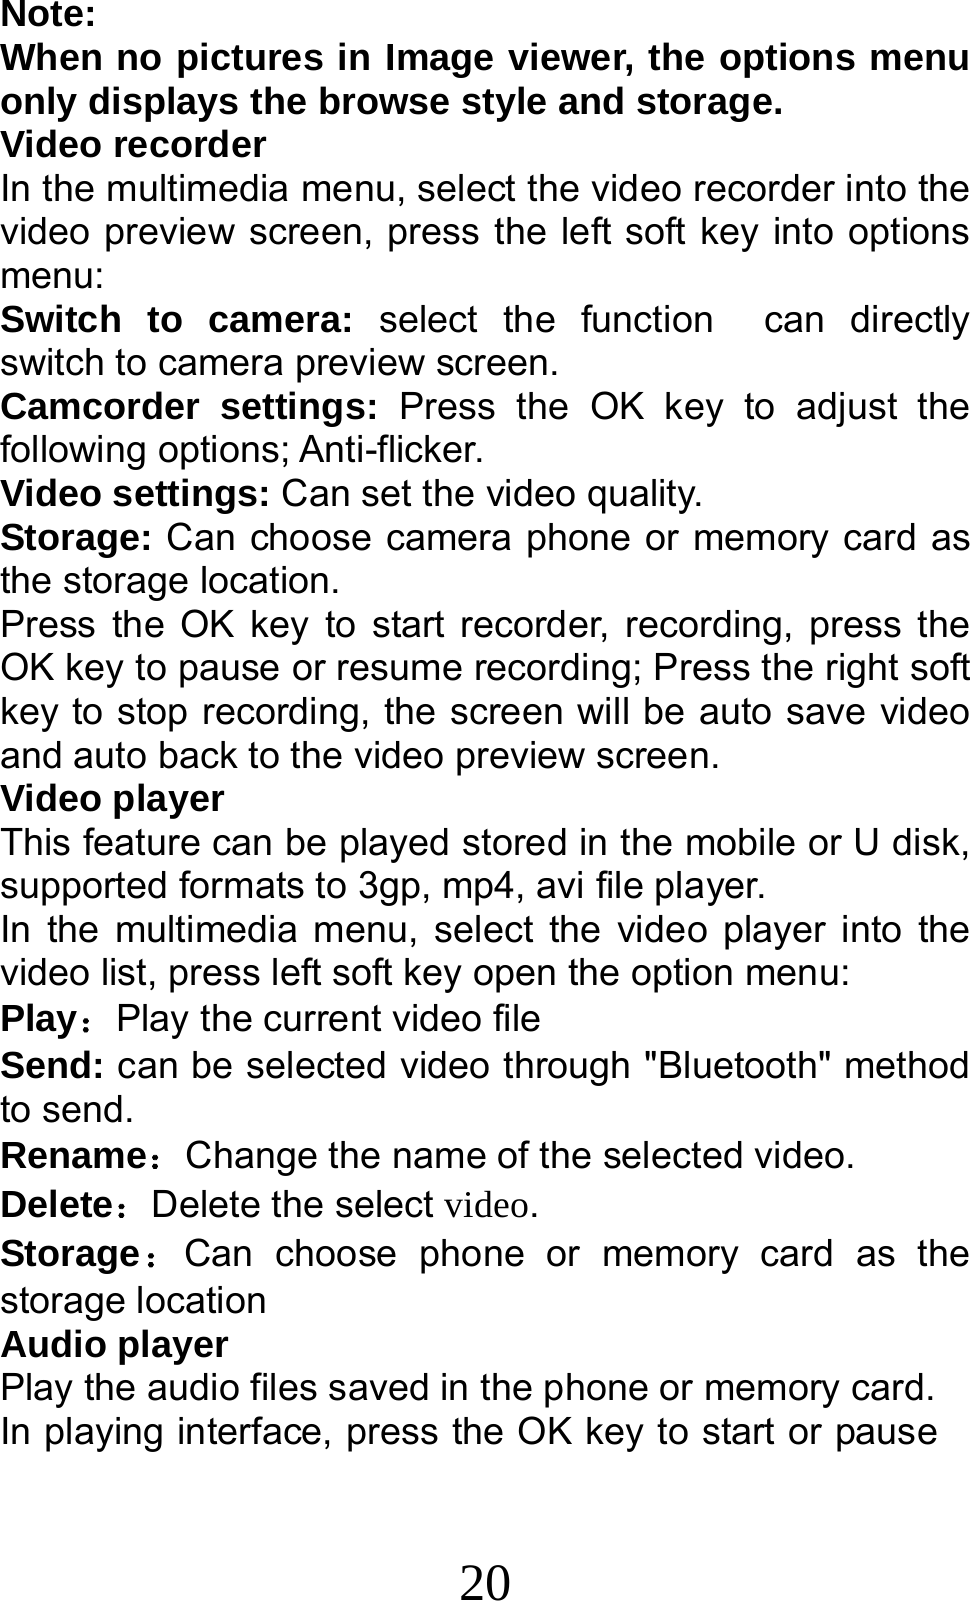 20 Note:  When no pictures in Image viewer, the options menu only displays the browse style and storage. Video recorder In the multimedia menu, select the video recorder into the video preview screen, press the left soft key into options menu: Switch to camera: select the function  can directly switch to camera preview screen. Camcorder settings: Press the OK key to adjust the following options; Anti-flicker. Video settings: Can set the video quality. Storage: Can choose camera phone or memory card as the storage location. Press the OK key to start recorder, recording, press the OK key to pause or resume recording; Press the right soft key to stop recording, the screen will be auto save video and auto back to the video preview screen.   Video player This feature can be played stored in the mobile or U disk, supported formats to 3gp, mp4, avi file player. In the multimedia menu, select the video player into the video list, press left soft key open the option menu:   Play：Play the current video file Send: can be selected video through &quot;Bluetooth&quot; method to send. Rename：Change the name of the selected video. Delete：Delete the select video. Storage：Can choose phone or memory card as the storage location Audio player Play the audio files saved in the phone or memory card. In playing interface, press the OK key to start or pause 